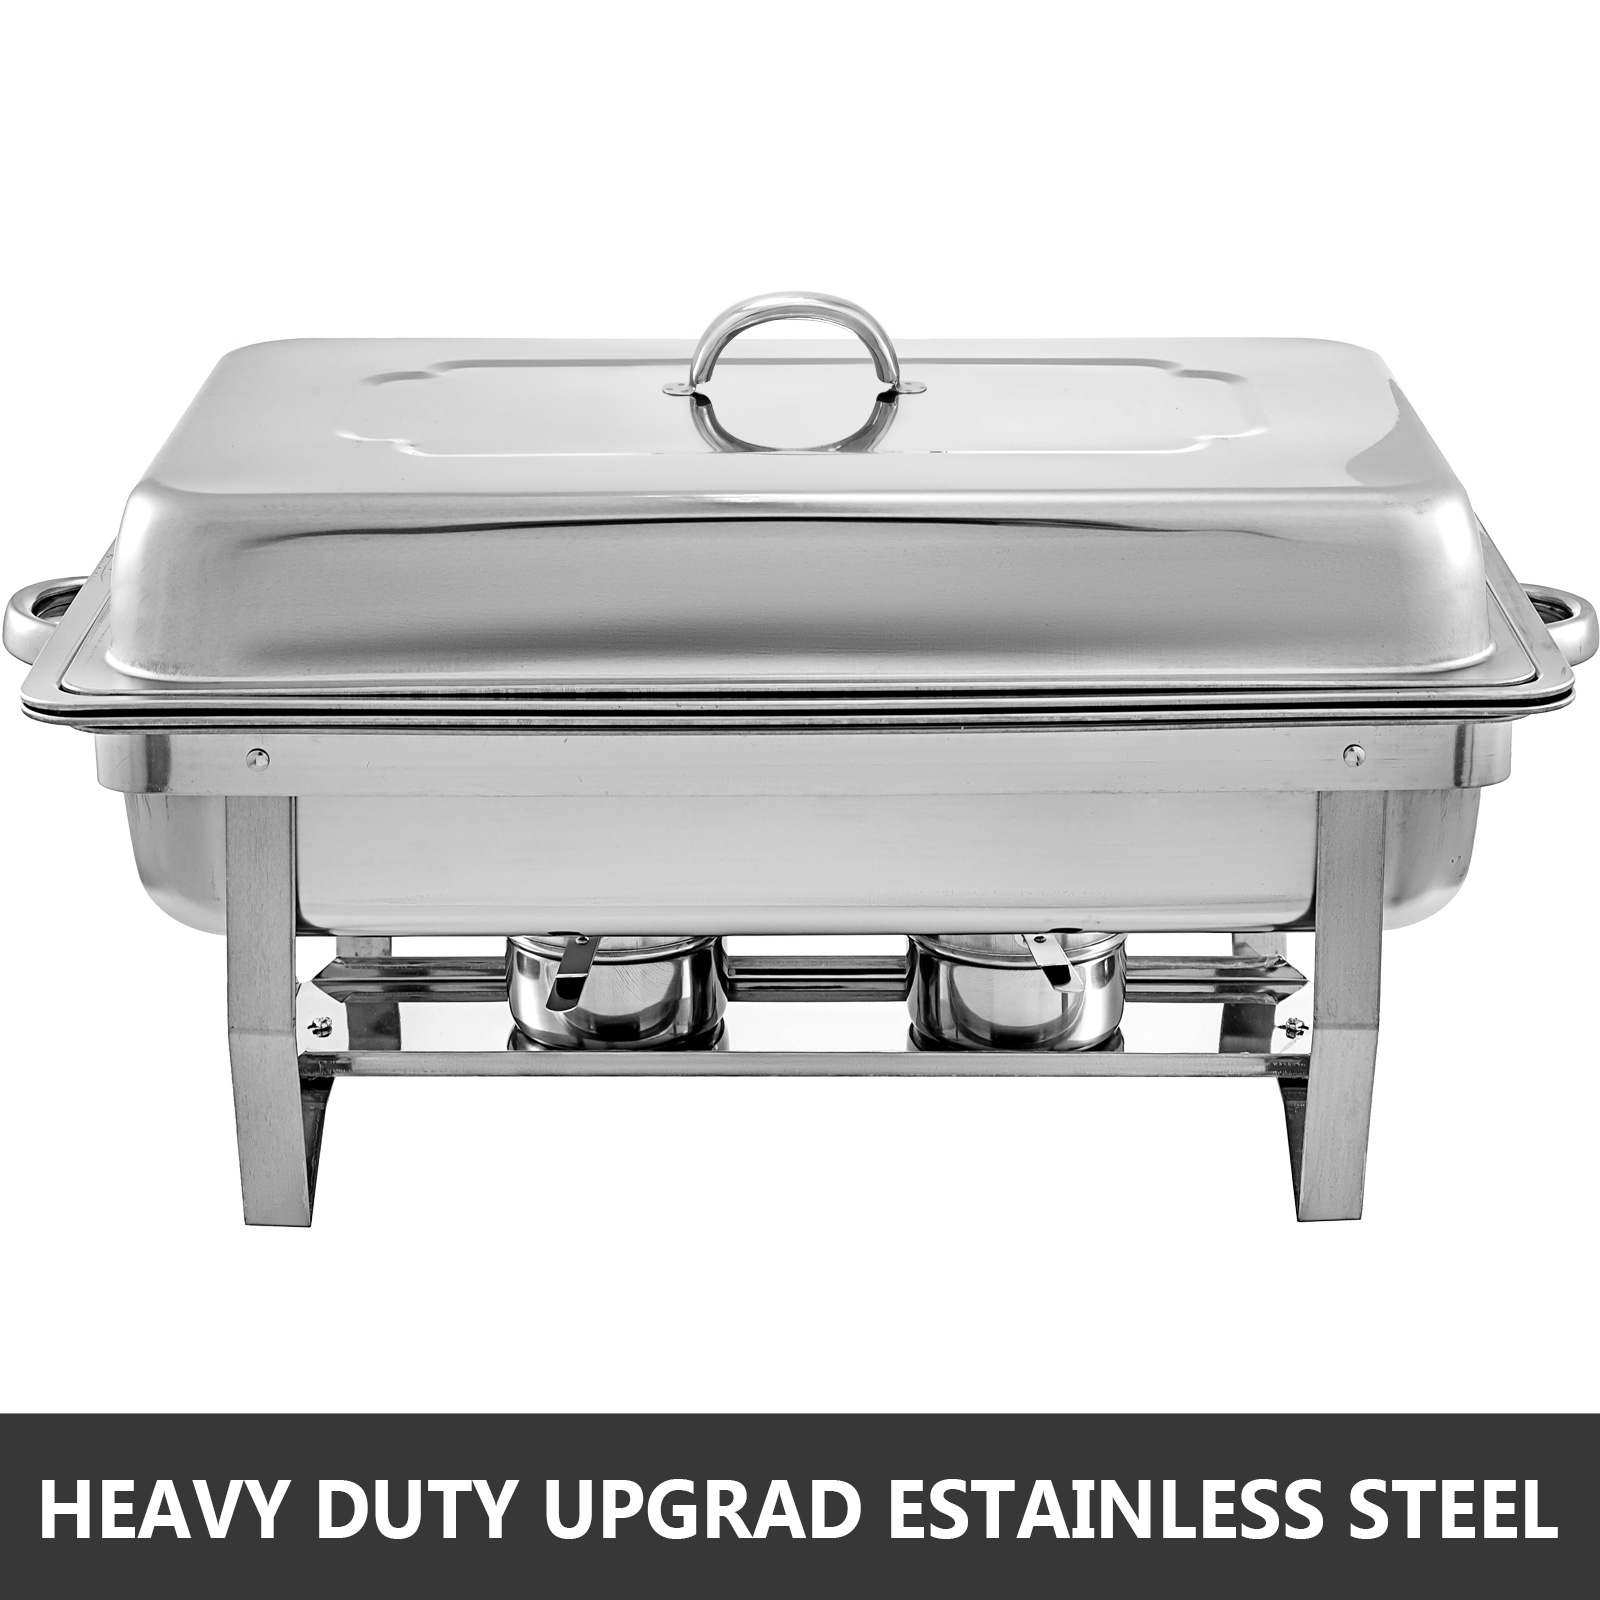 4 Pack Chafing Dish Sets Buffet Catering Stainless Steel W/Tray Folding Chafer 